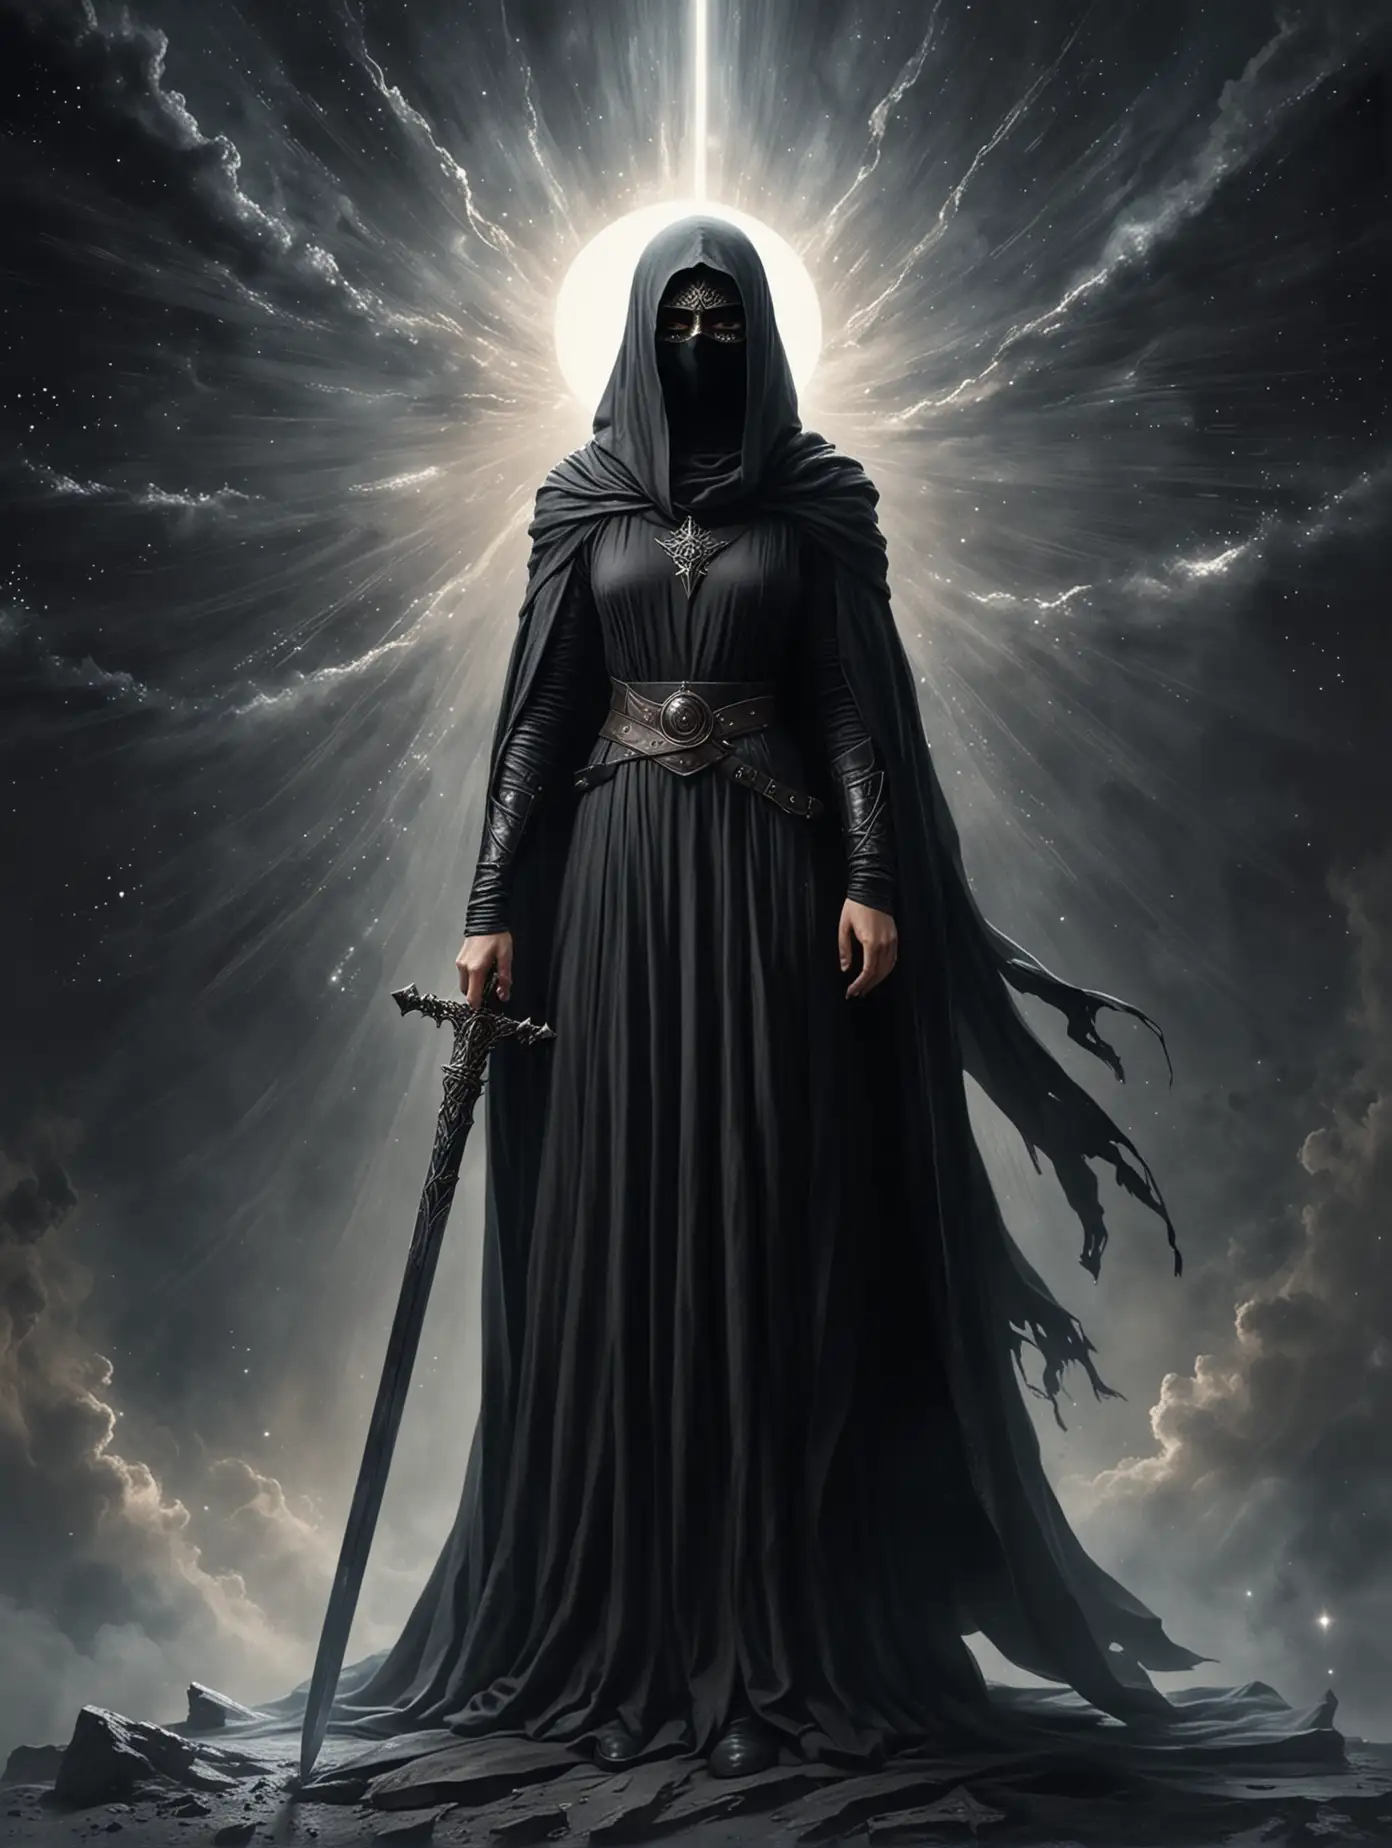 Mystical-Sister-Geserit-Wielding-a-Black-Sword-on-the-Brink-of-a-Cosmic-Abyss